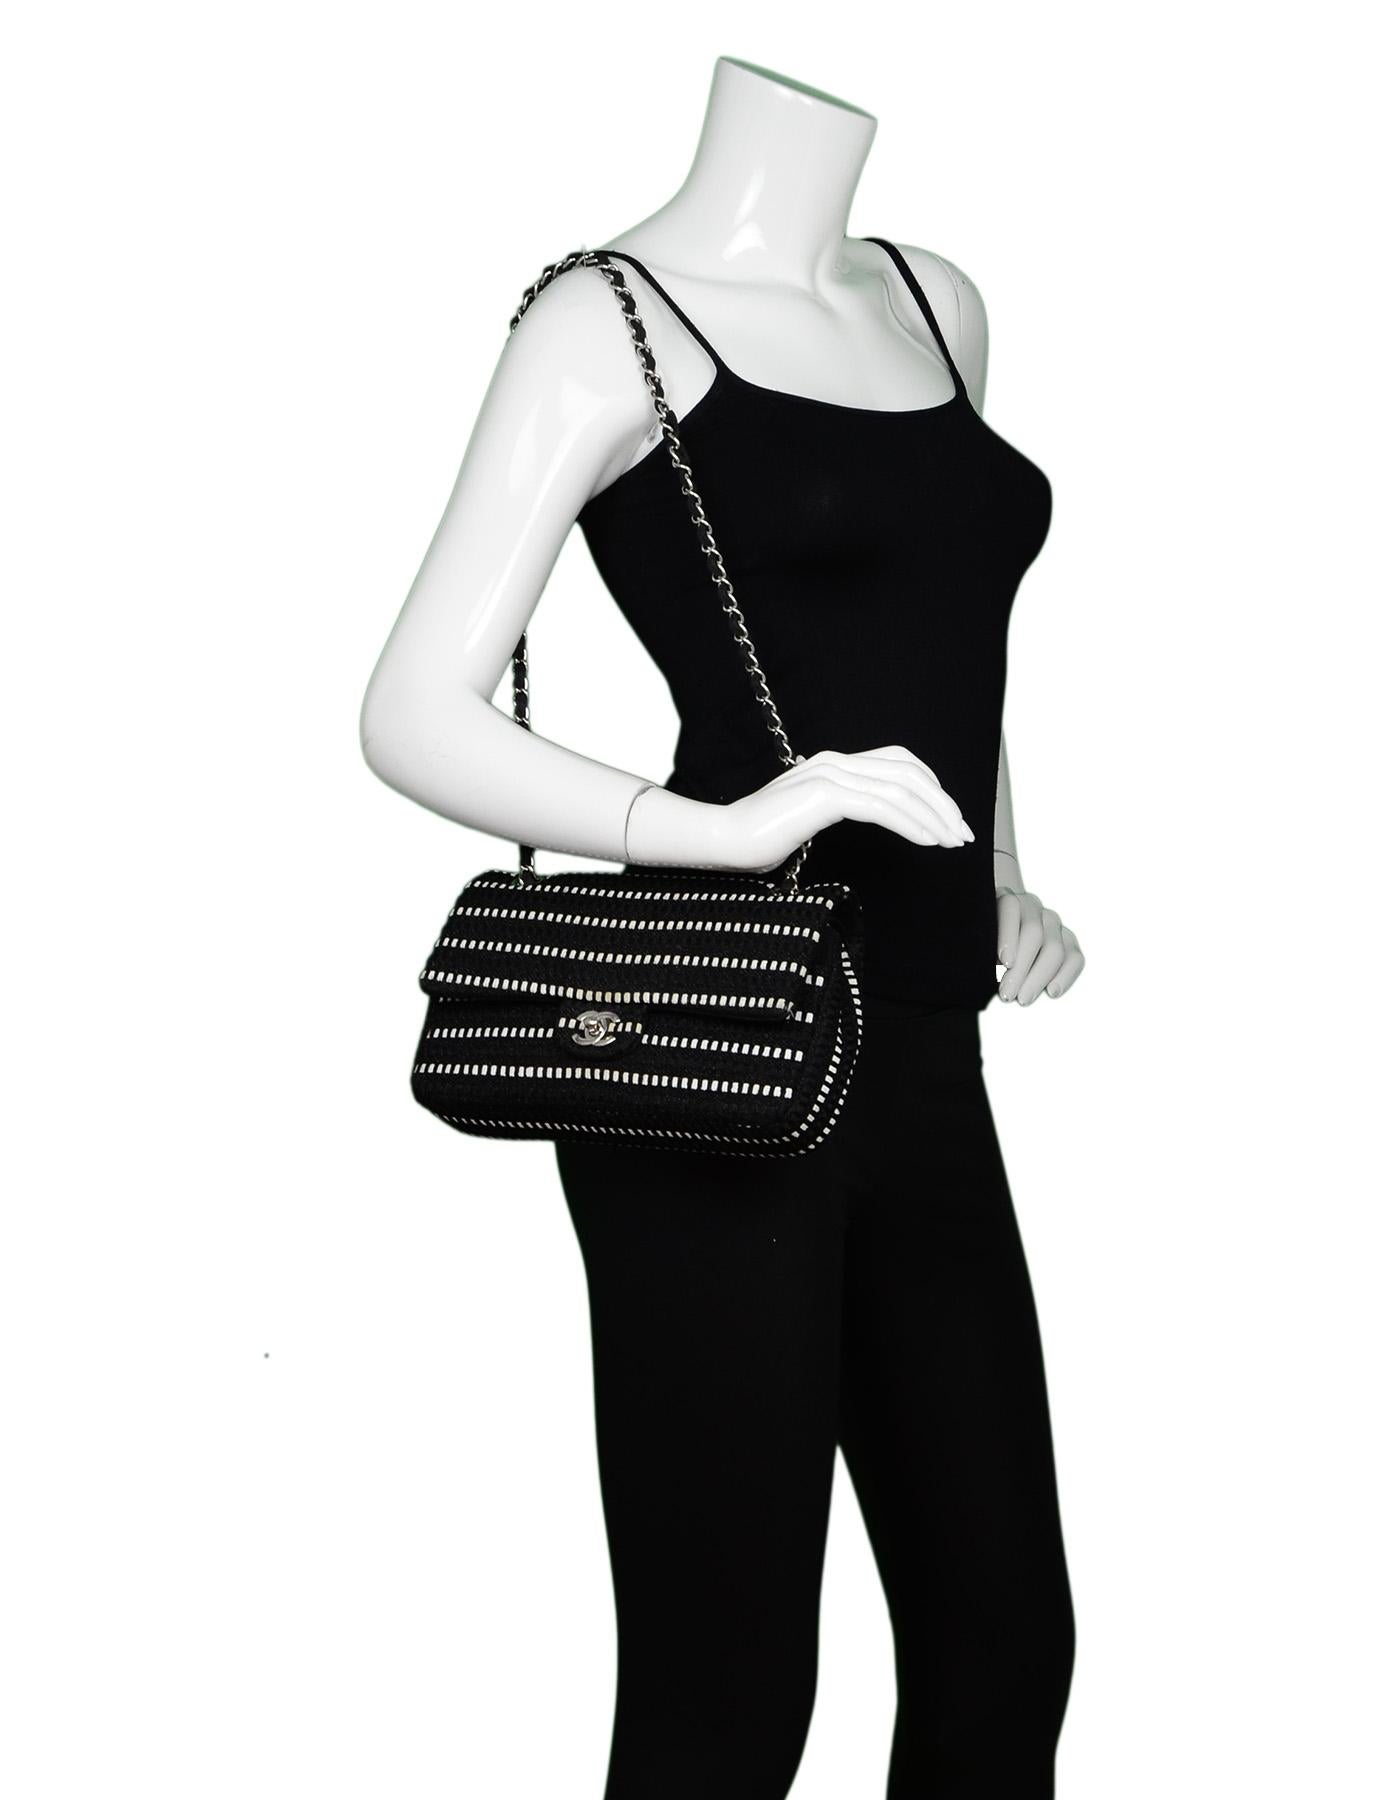 Chanel Black Sparkle/White Tweed Double Flap Bag W/ Silvertone CC Hardware 

Made In: France
Year of Production: 2014
Color: Black/white
Hardware: Silvertone
Materials: Black sparkle and white woven tweed, 
Lining: Black and cream textile